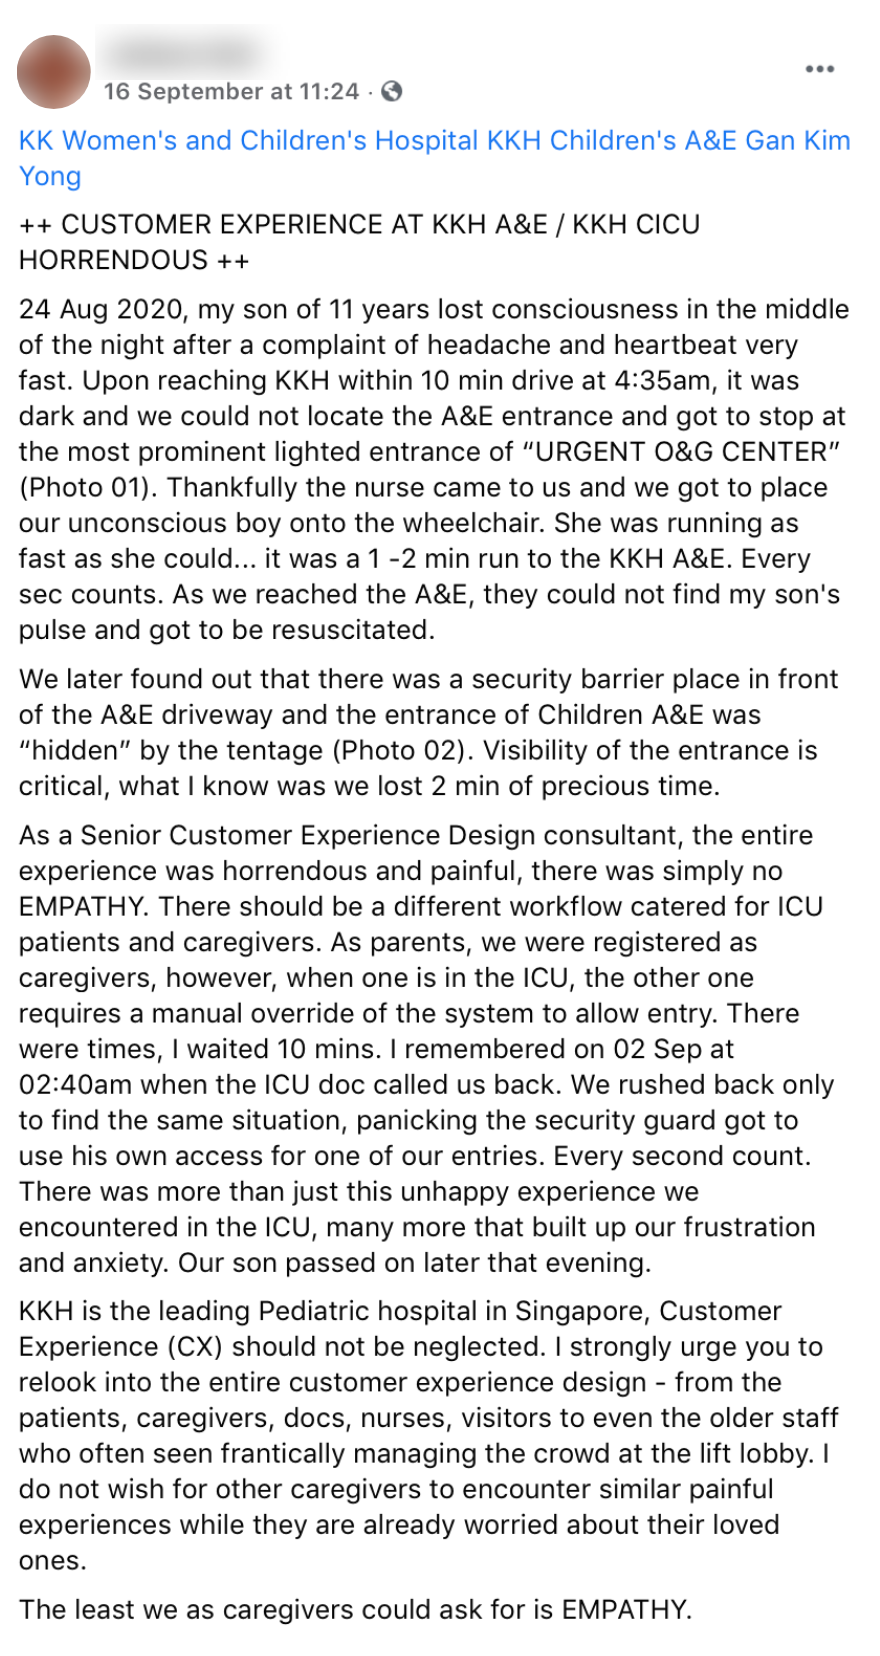 Original post about obscured A&E entrance